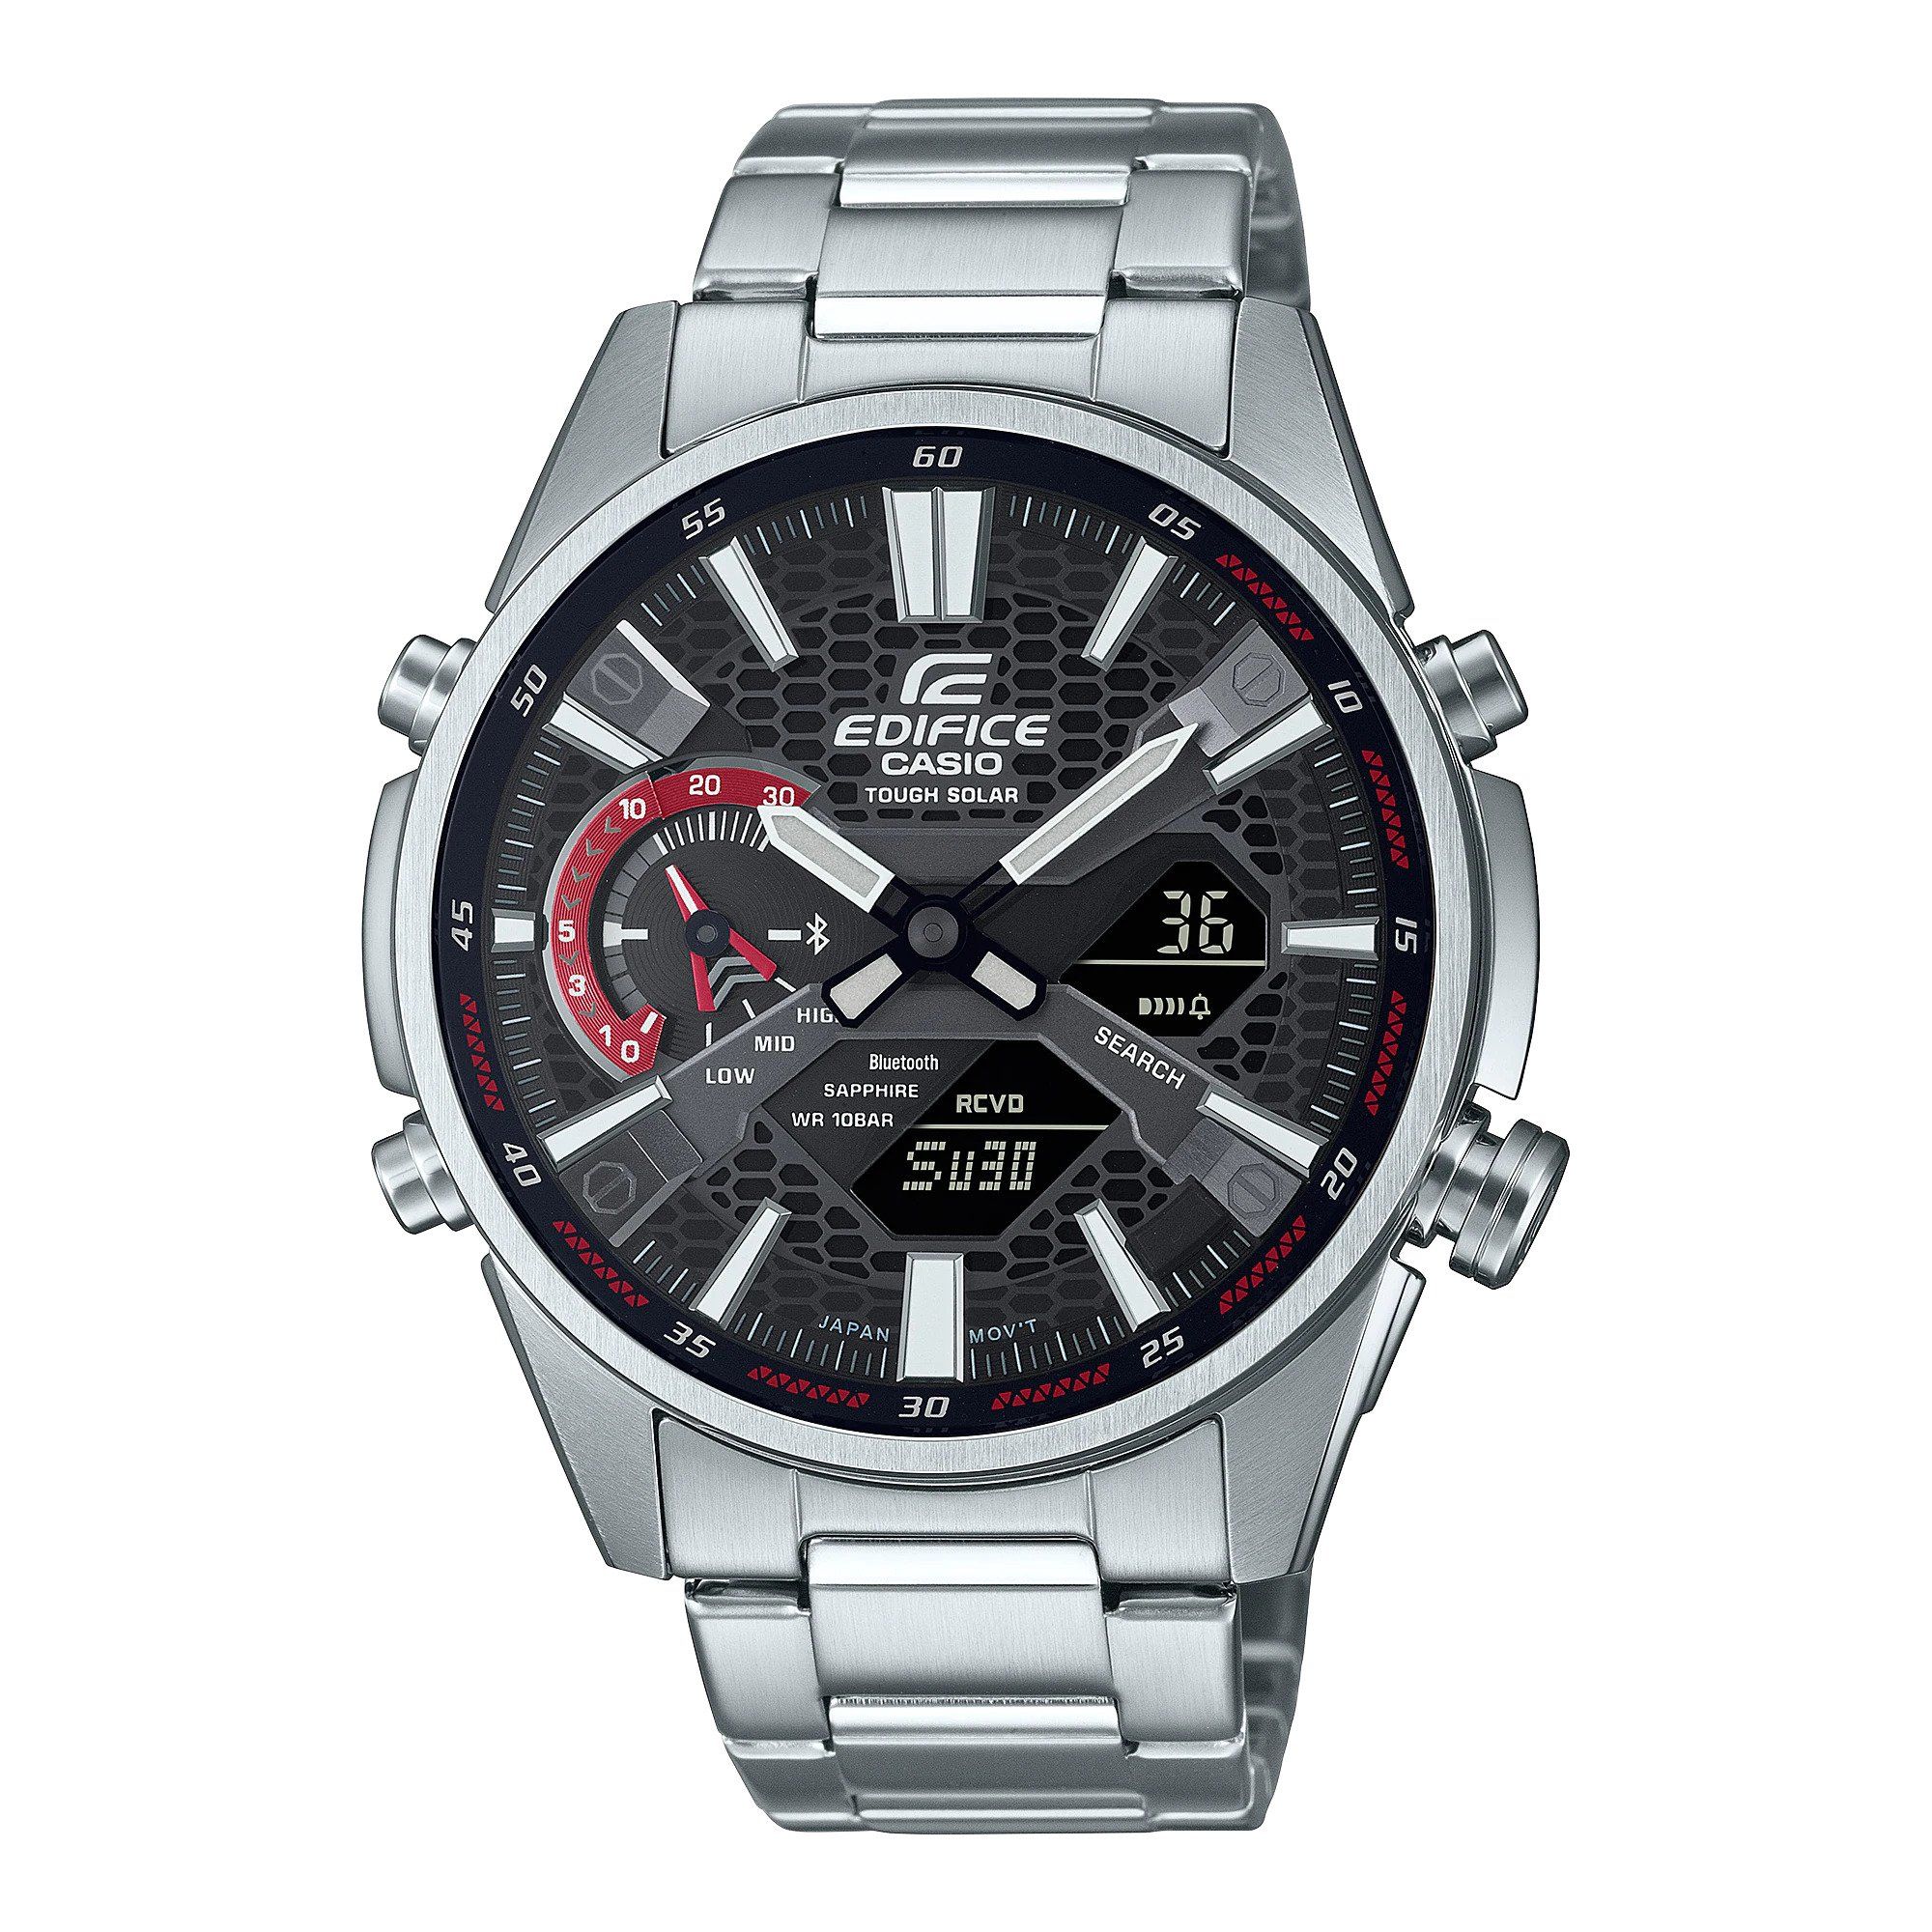 This Casio Edifice Analogue-Digital Watch for Men is the perfect timepiece to wear or to gift. It's Silver 42 mm Round case combined with the comfortable Silver Stainless steel will ensure you enjoy this stunning timepiece without any compromise. Operated by a high quality Quartz movement and water resistant to 10 bars, your watch will keep ticking. This sporty and fashionable watch gives you a unique feeling in every outfit! -The watch has a Calendar function: Day-Date, Bluetooth, Solar Powered,Stop Watch, Worldtime, Countdown High quality 21 cm length and 21 mm width Silver Stainless steel strap with a Fold over with push button clasp Case diameter: 42 mm,case thickness: 9 mm, case colour: Silver and dial colour: Black